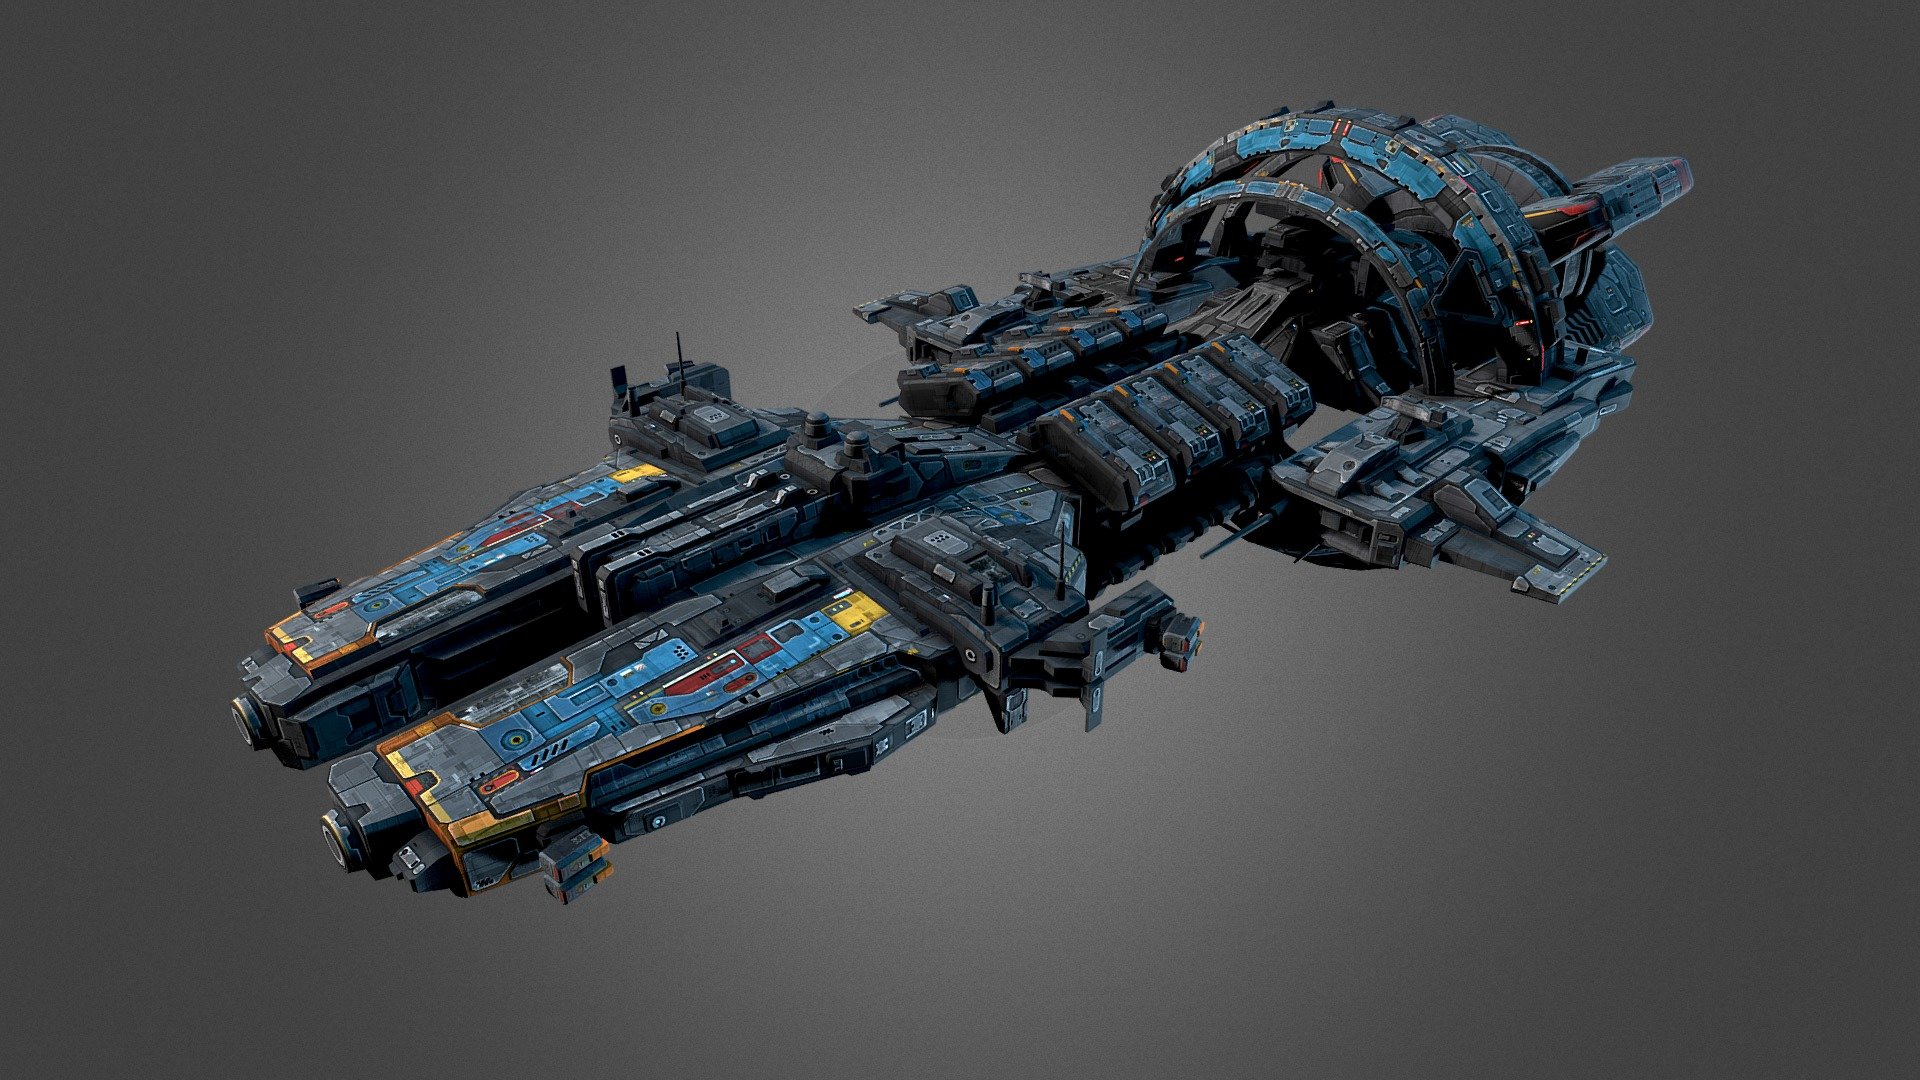 Low-poly 3d model ready for Virtual Reality (VR), Augmented Reality (AR), games and other real-time apps.

Add a professional touch to your SciFi VideoGame project with this original low poly model. Set of one SciFi Spaceship 3d model